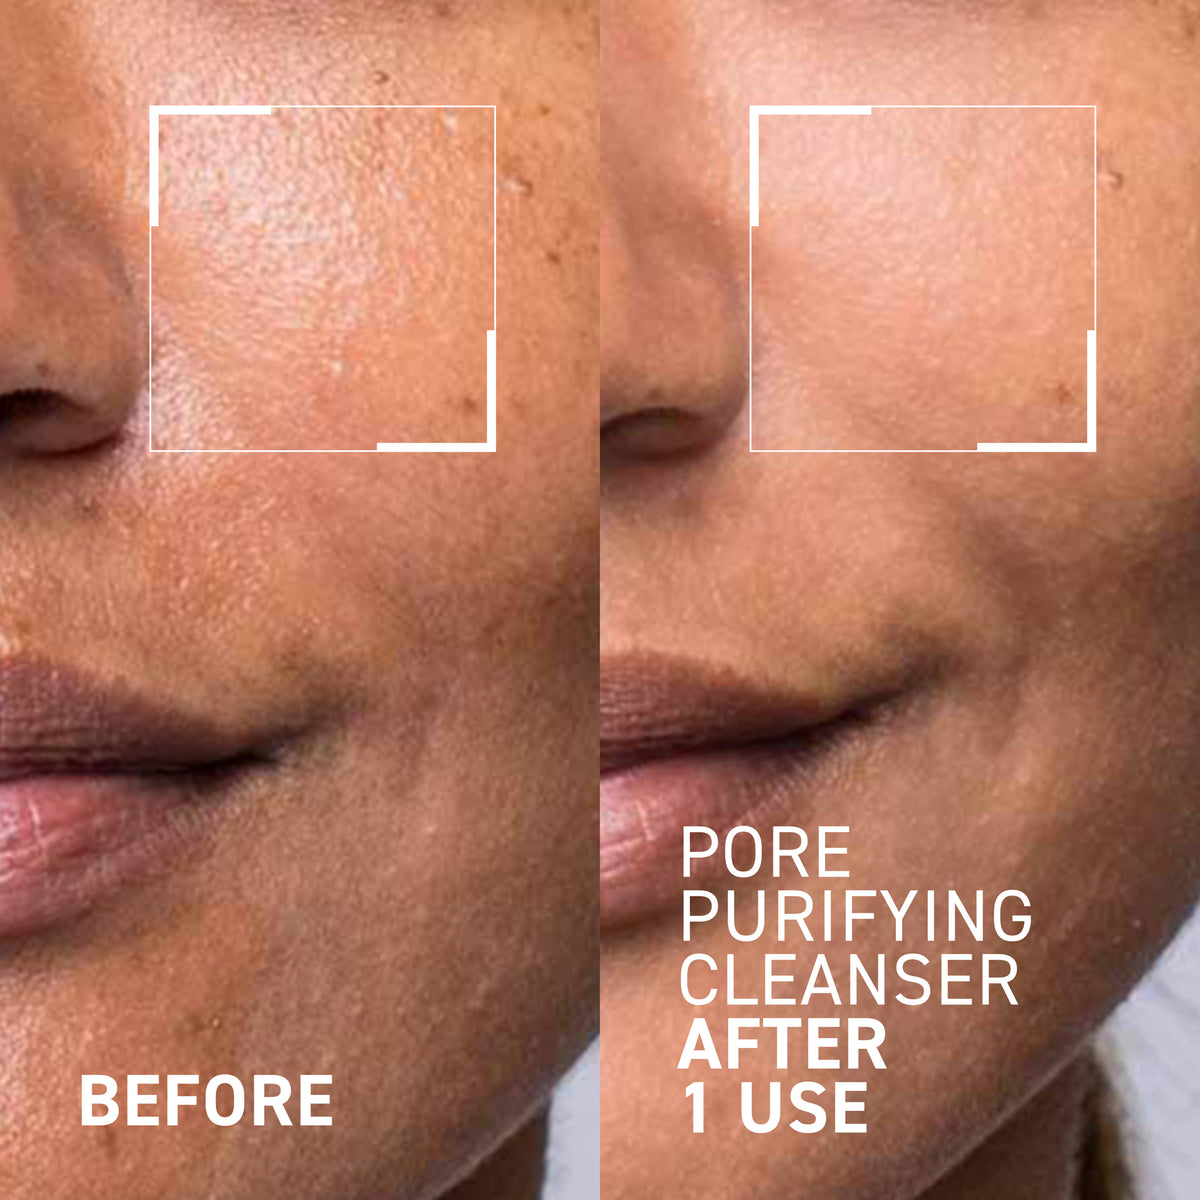 PORE PURIFYING CLEANSER